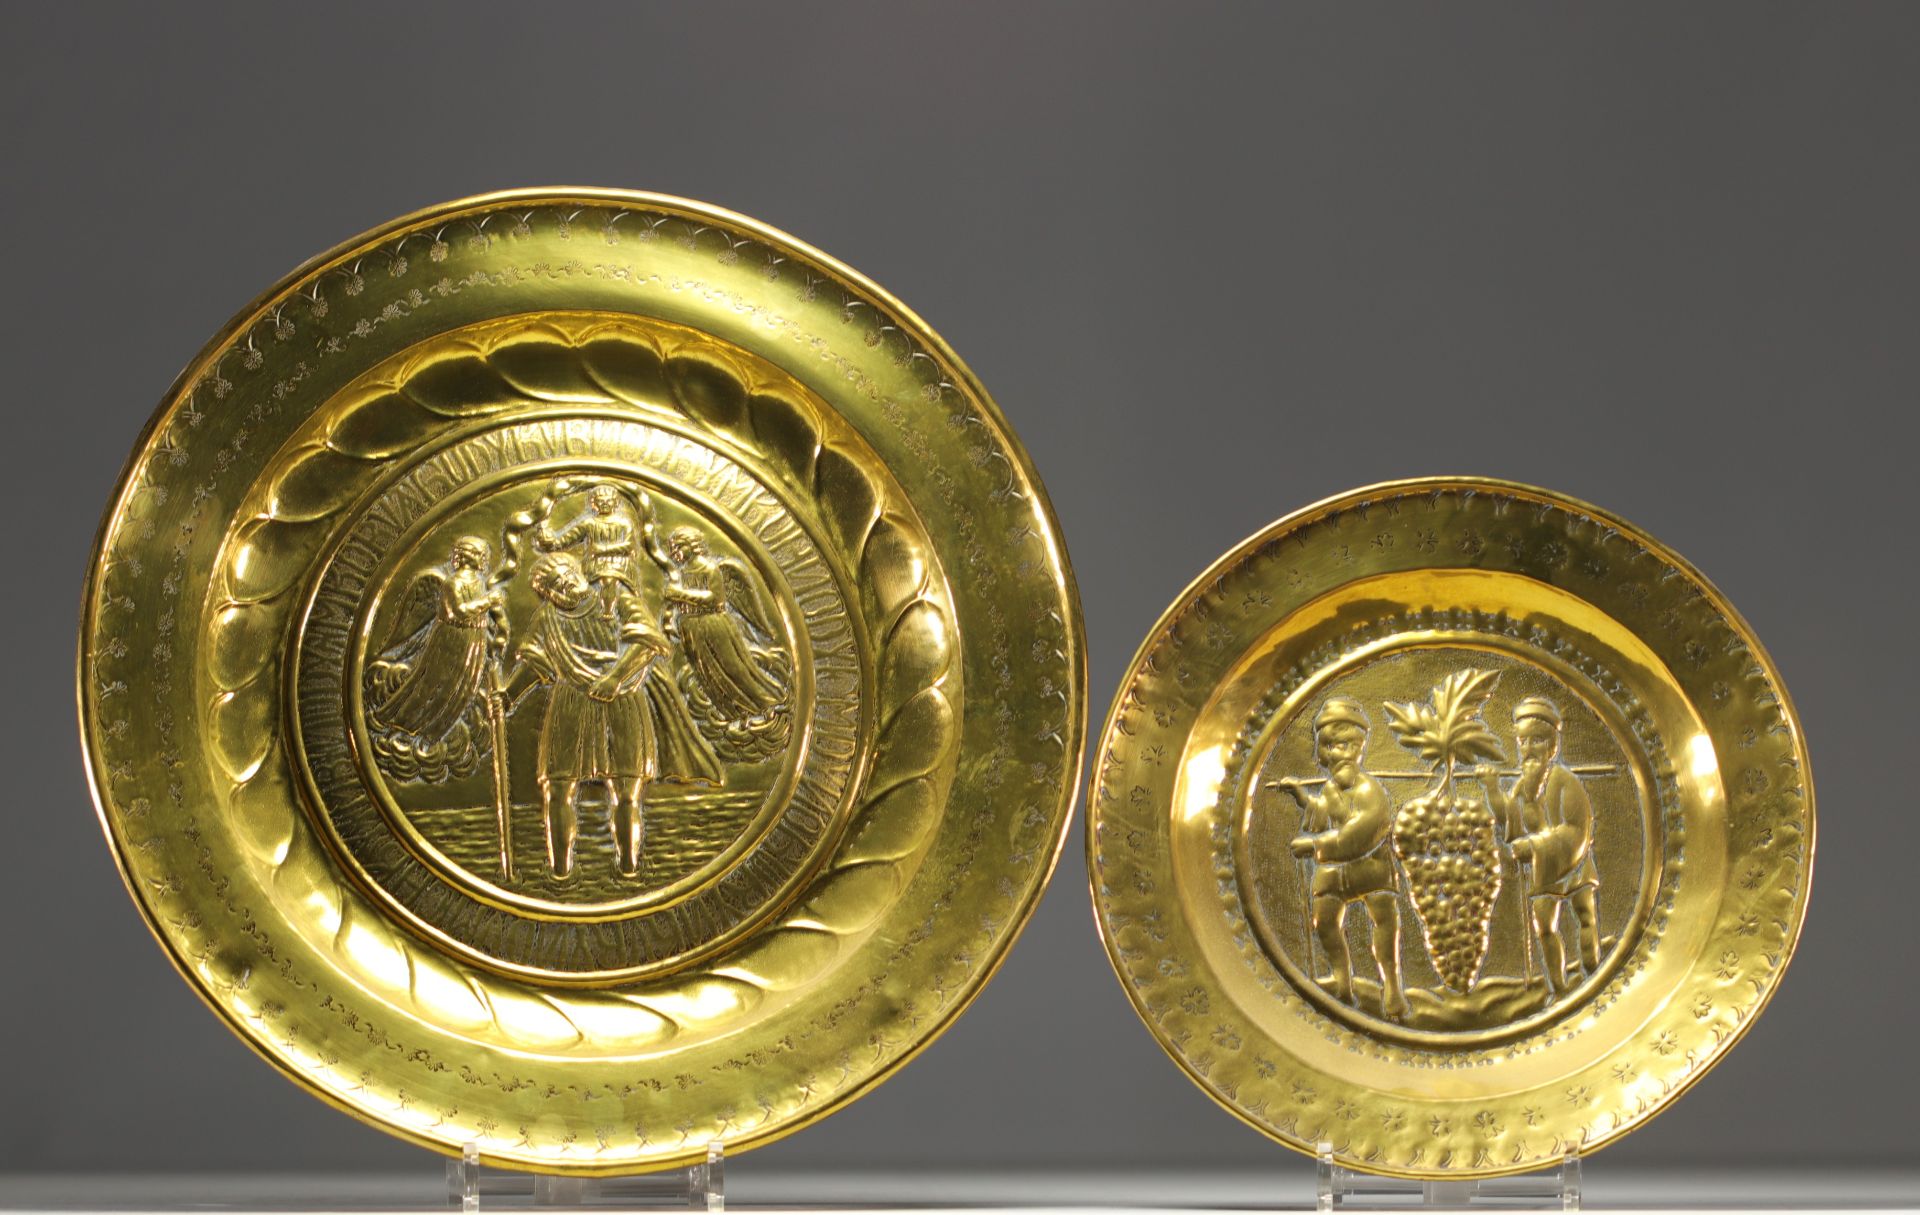 Set of two embossed and repousse brass offering dishes decorated with religious scenes.